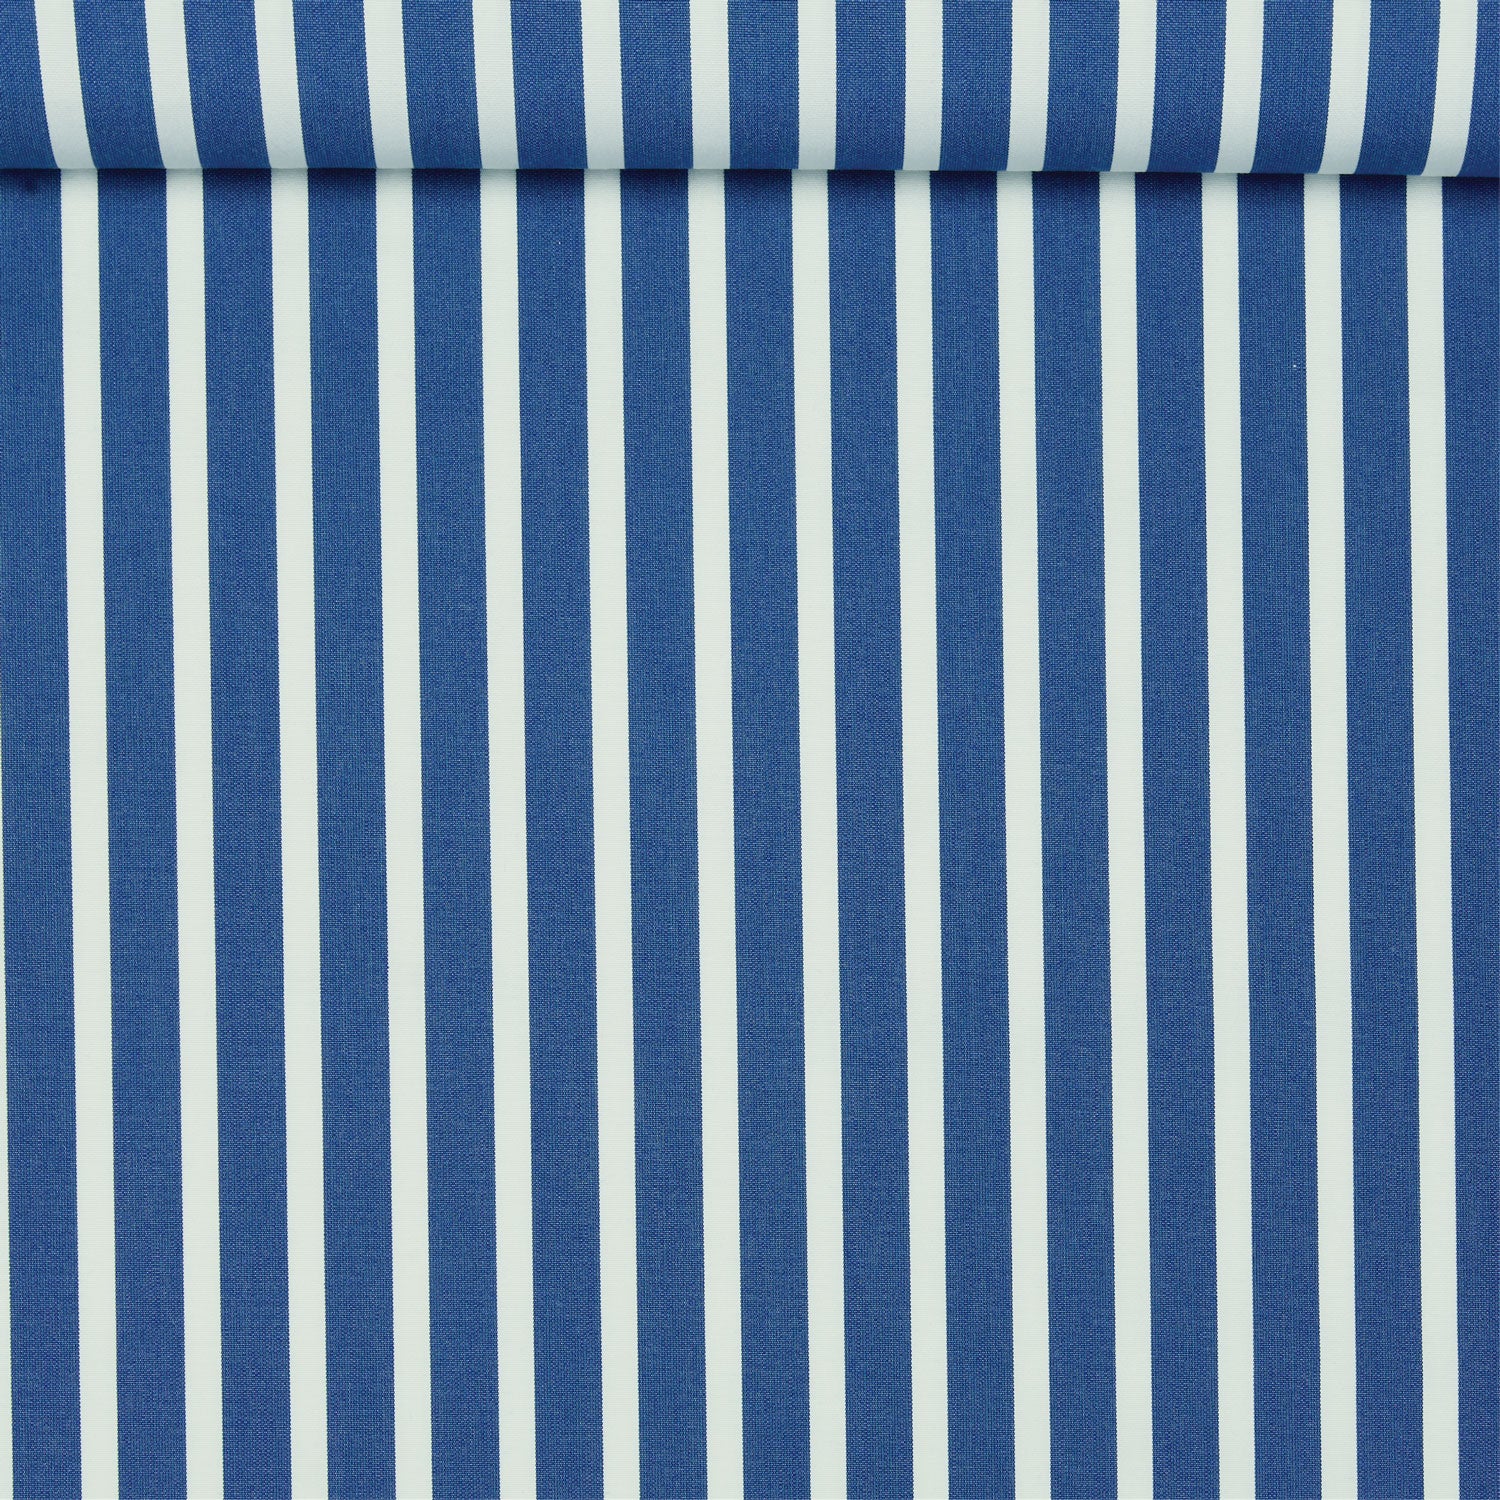 A birds eye view of a jacquard woven white and blue stripe pattern outdoor performance fabric roll. 